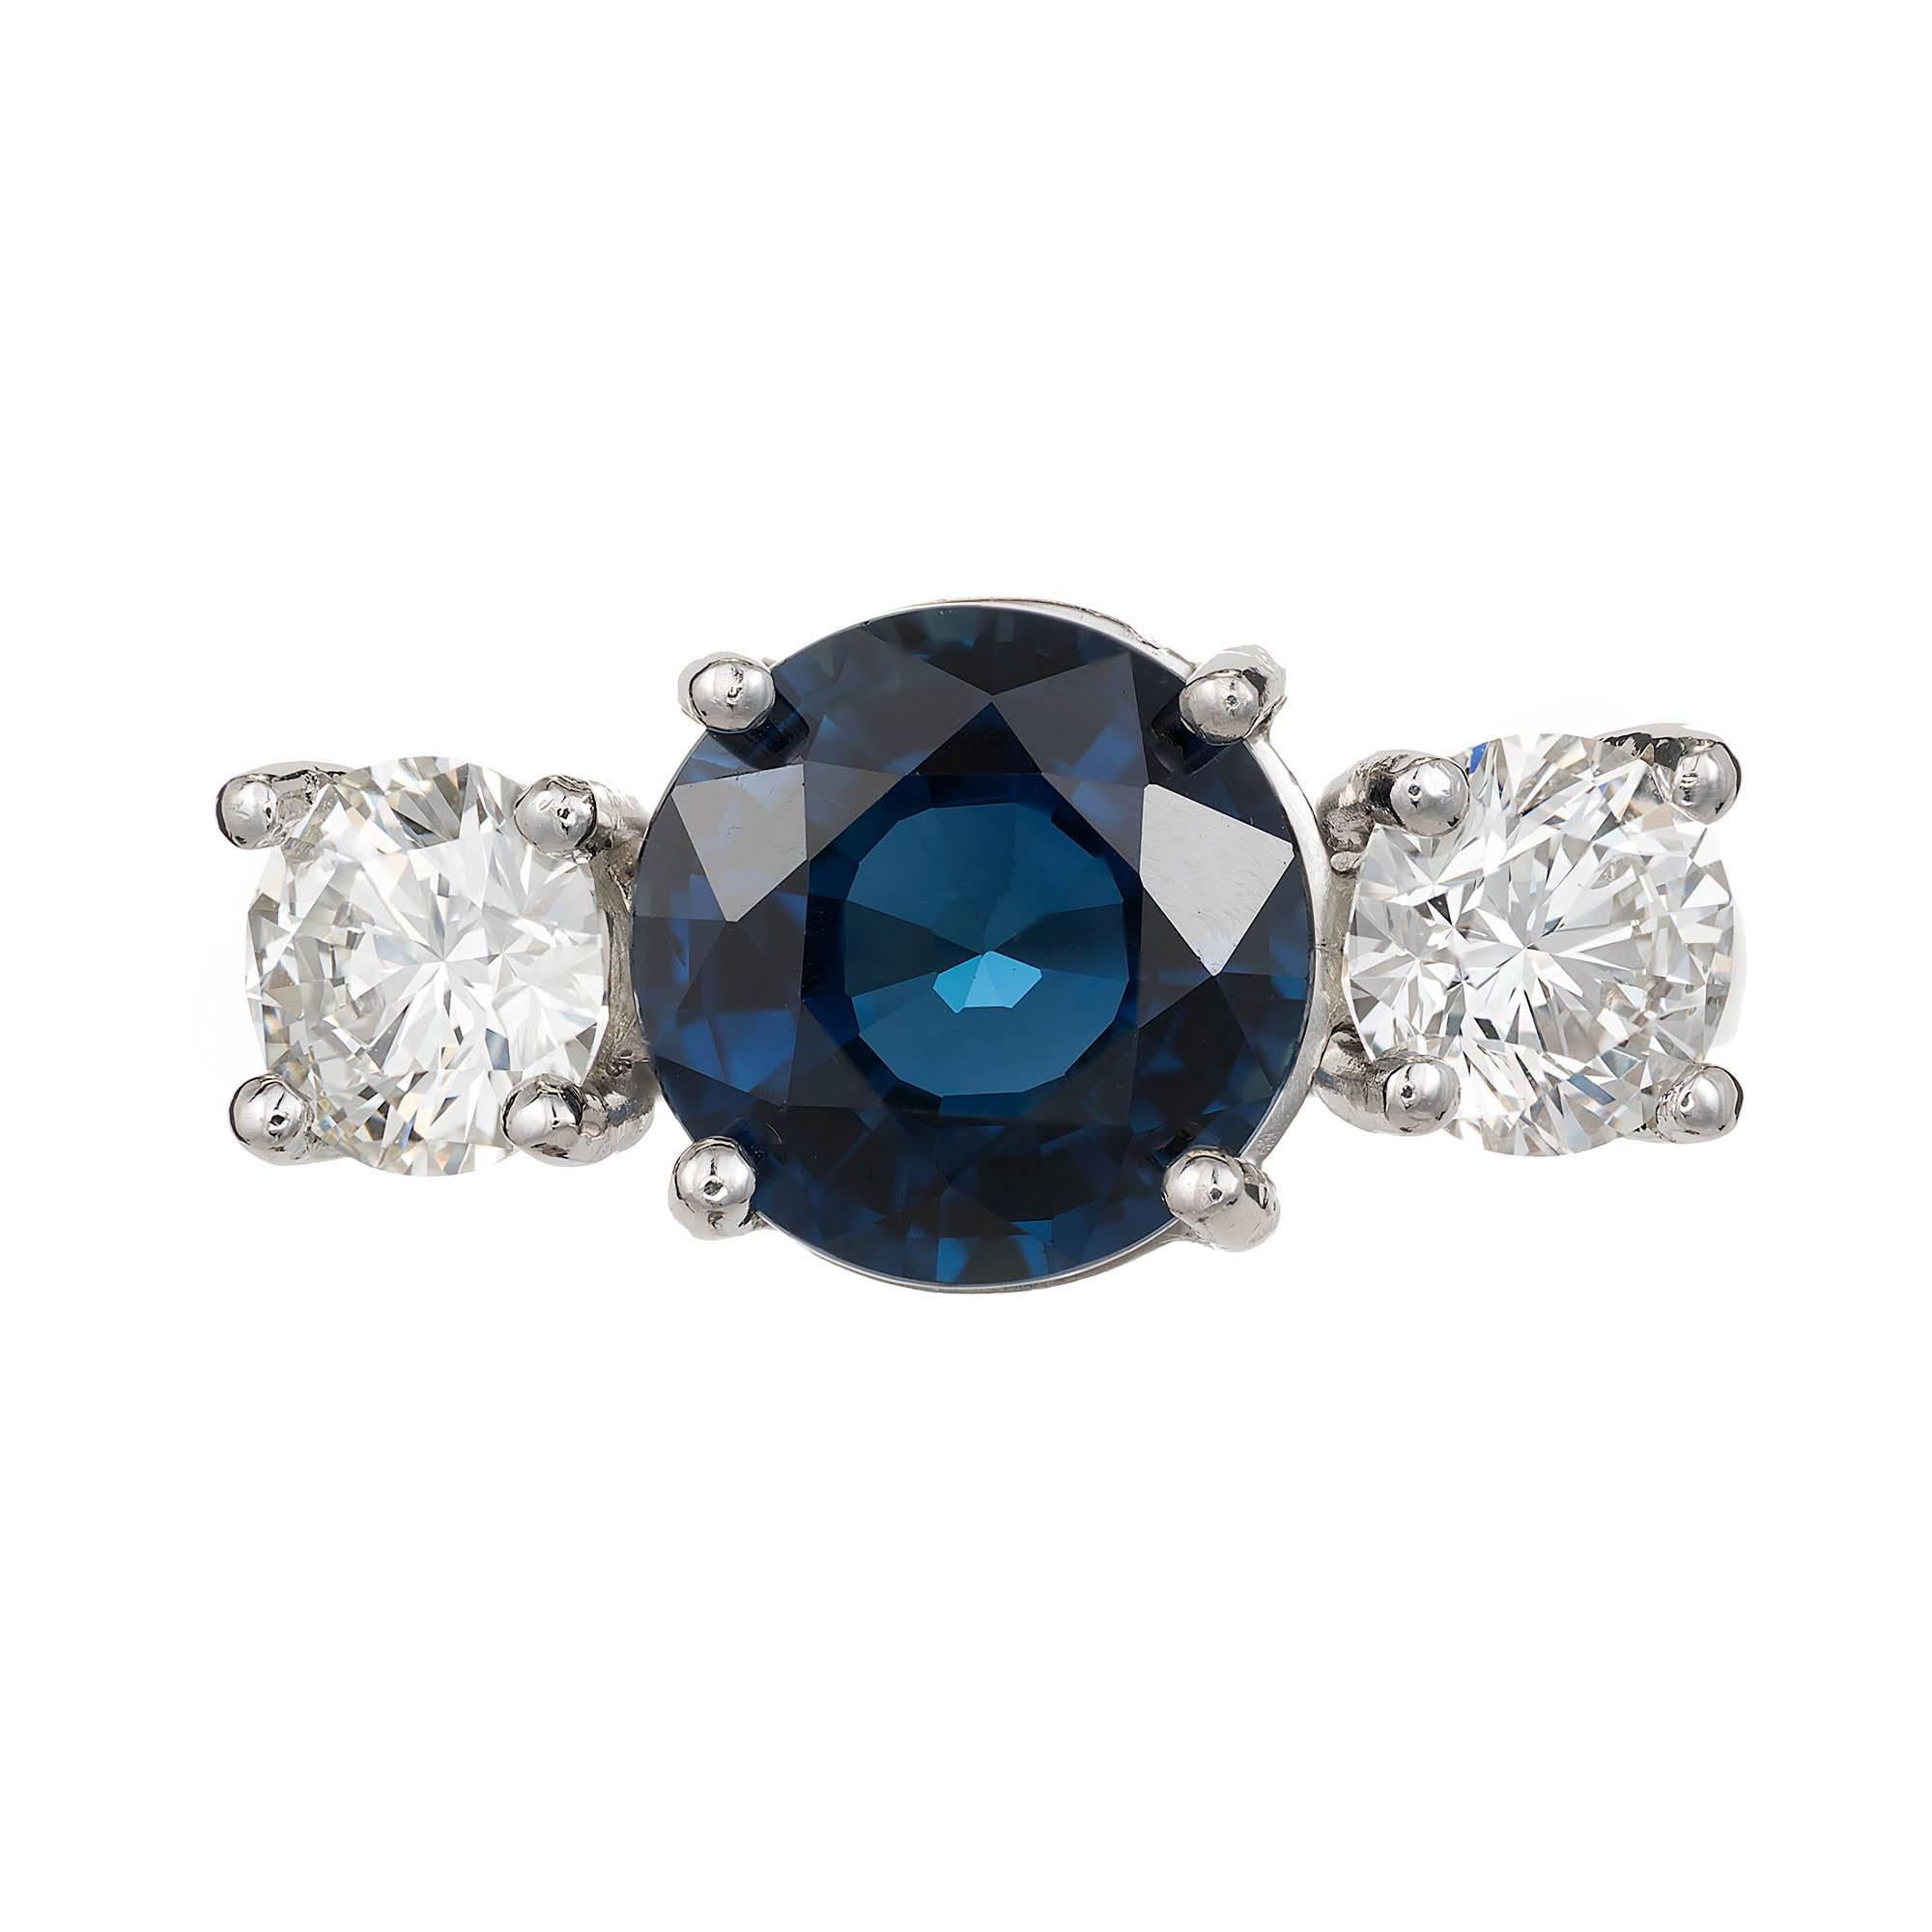 Peter Suchy sapphire and diamond three-stone engagement ring.  European cut natural round center sapphire with two European cut round side diamonds in a platinum cross prong style handmade setting.

1 round sapphire 3.92cts, European cut GIA